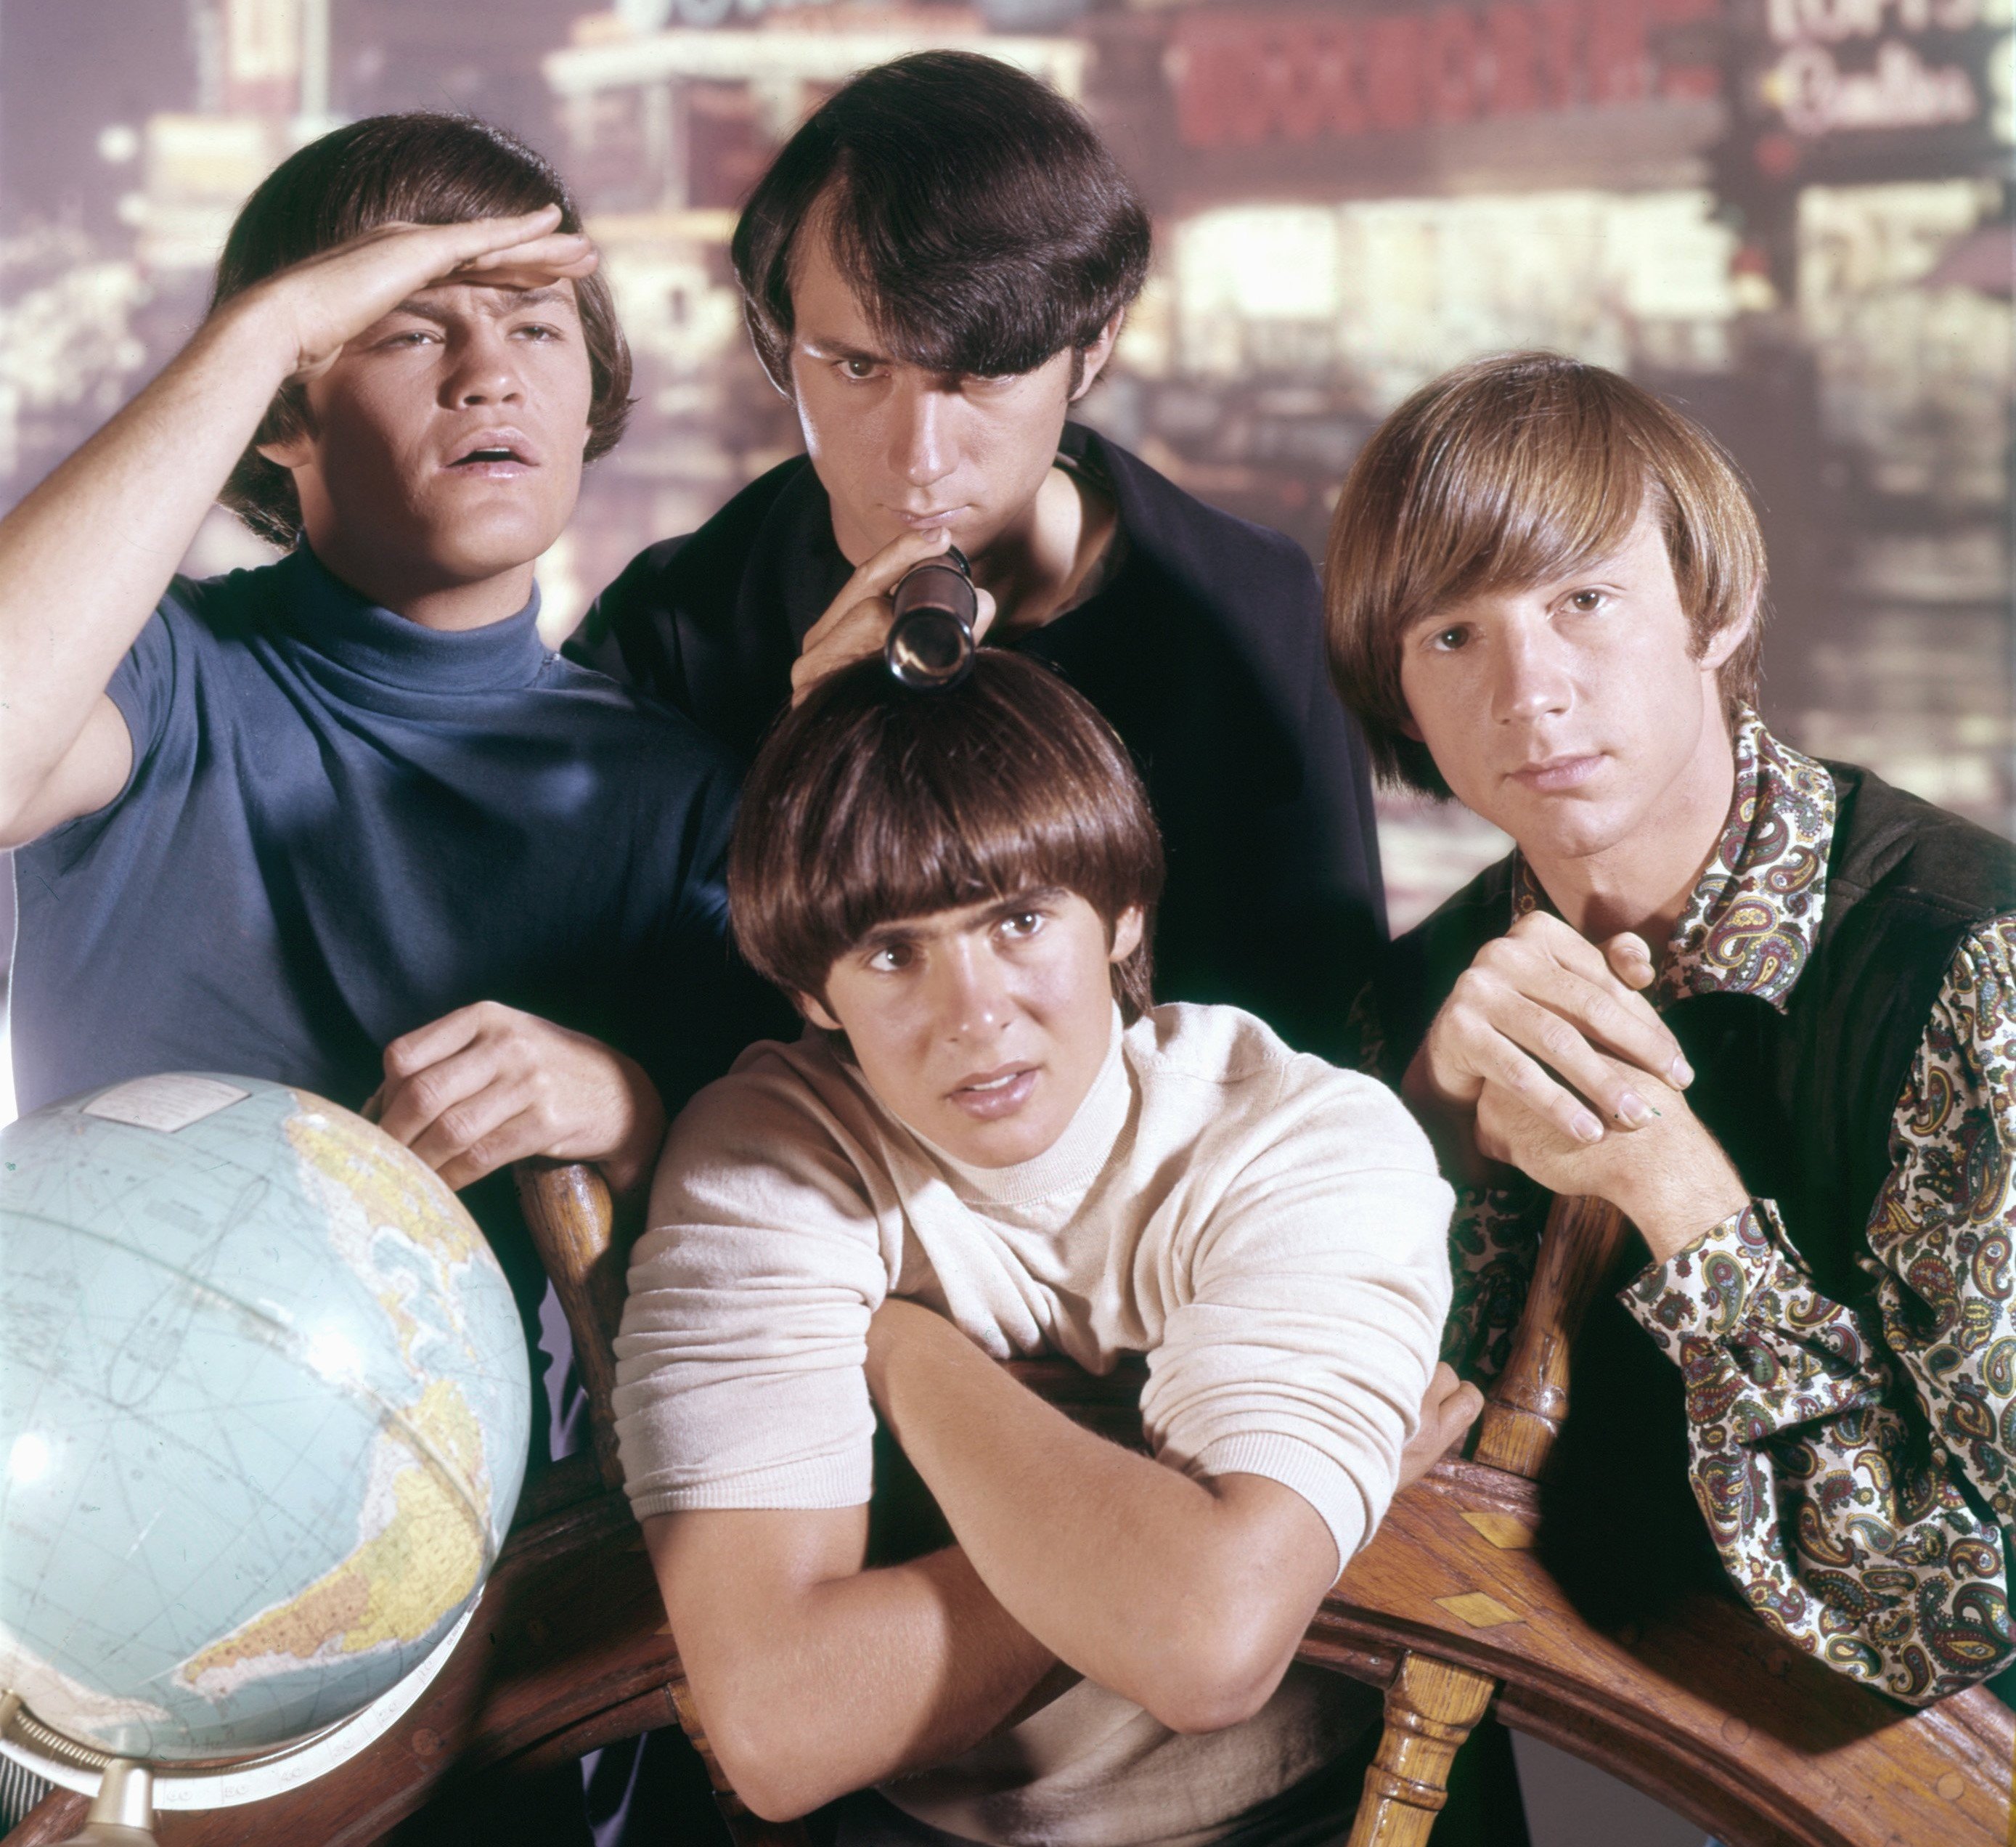 The Monkees' Micky Dolenz, Mike Nesmith, Davy Jones, and Peter Tork with a globe